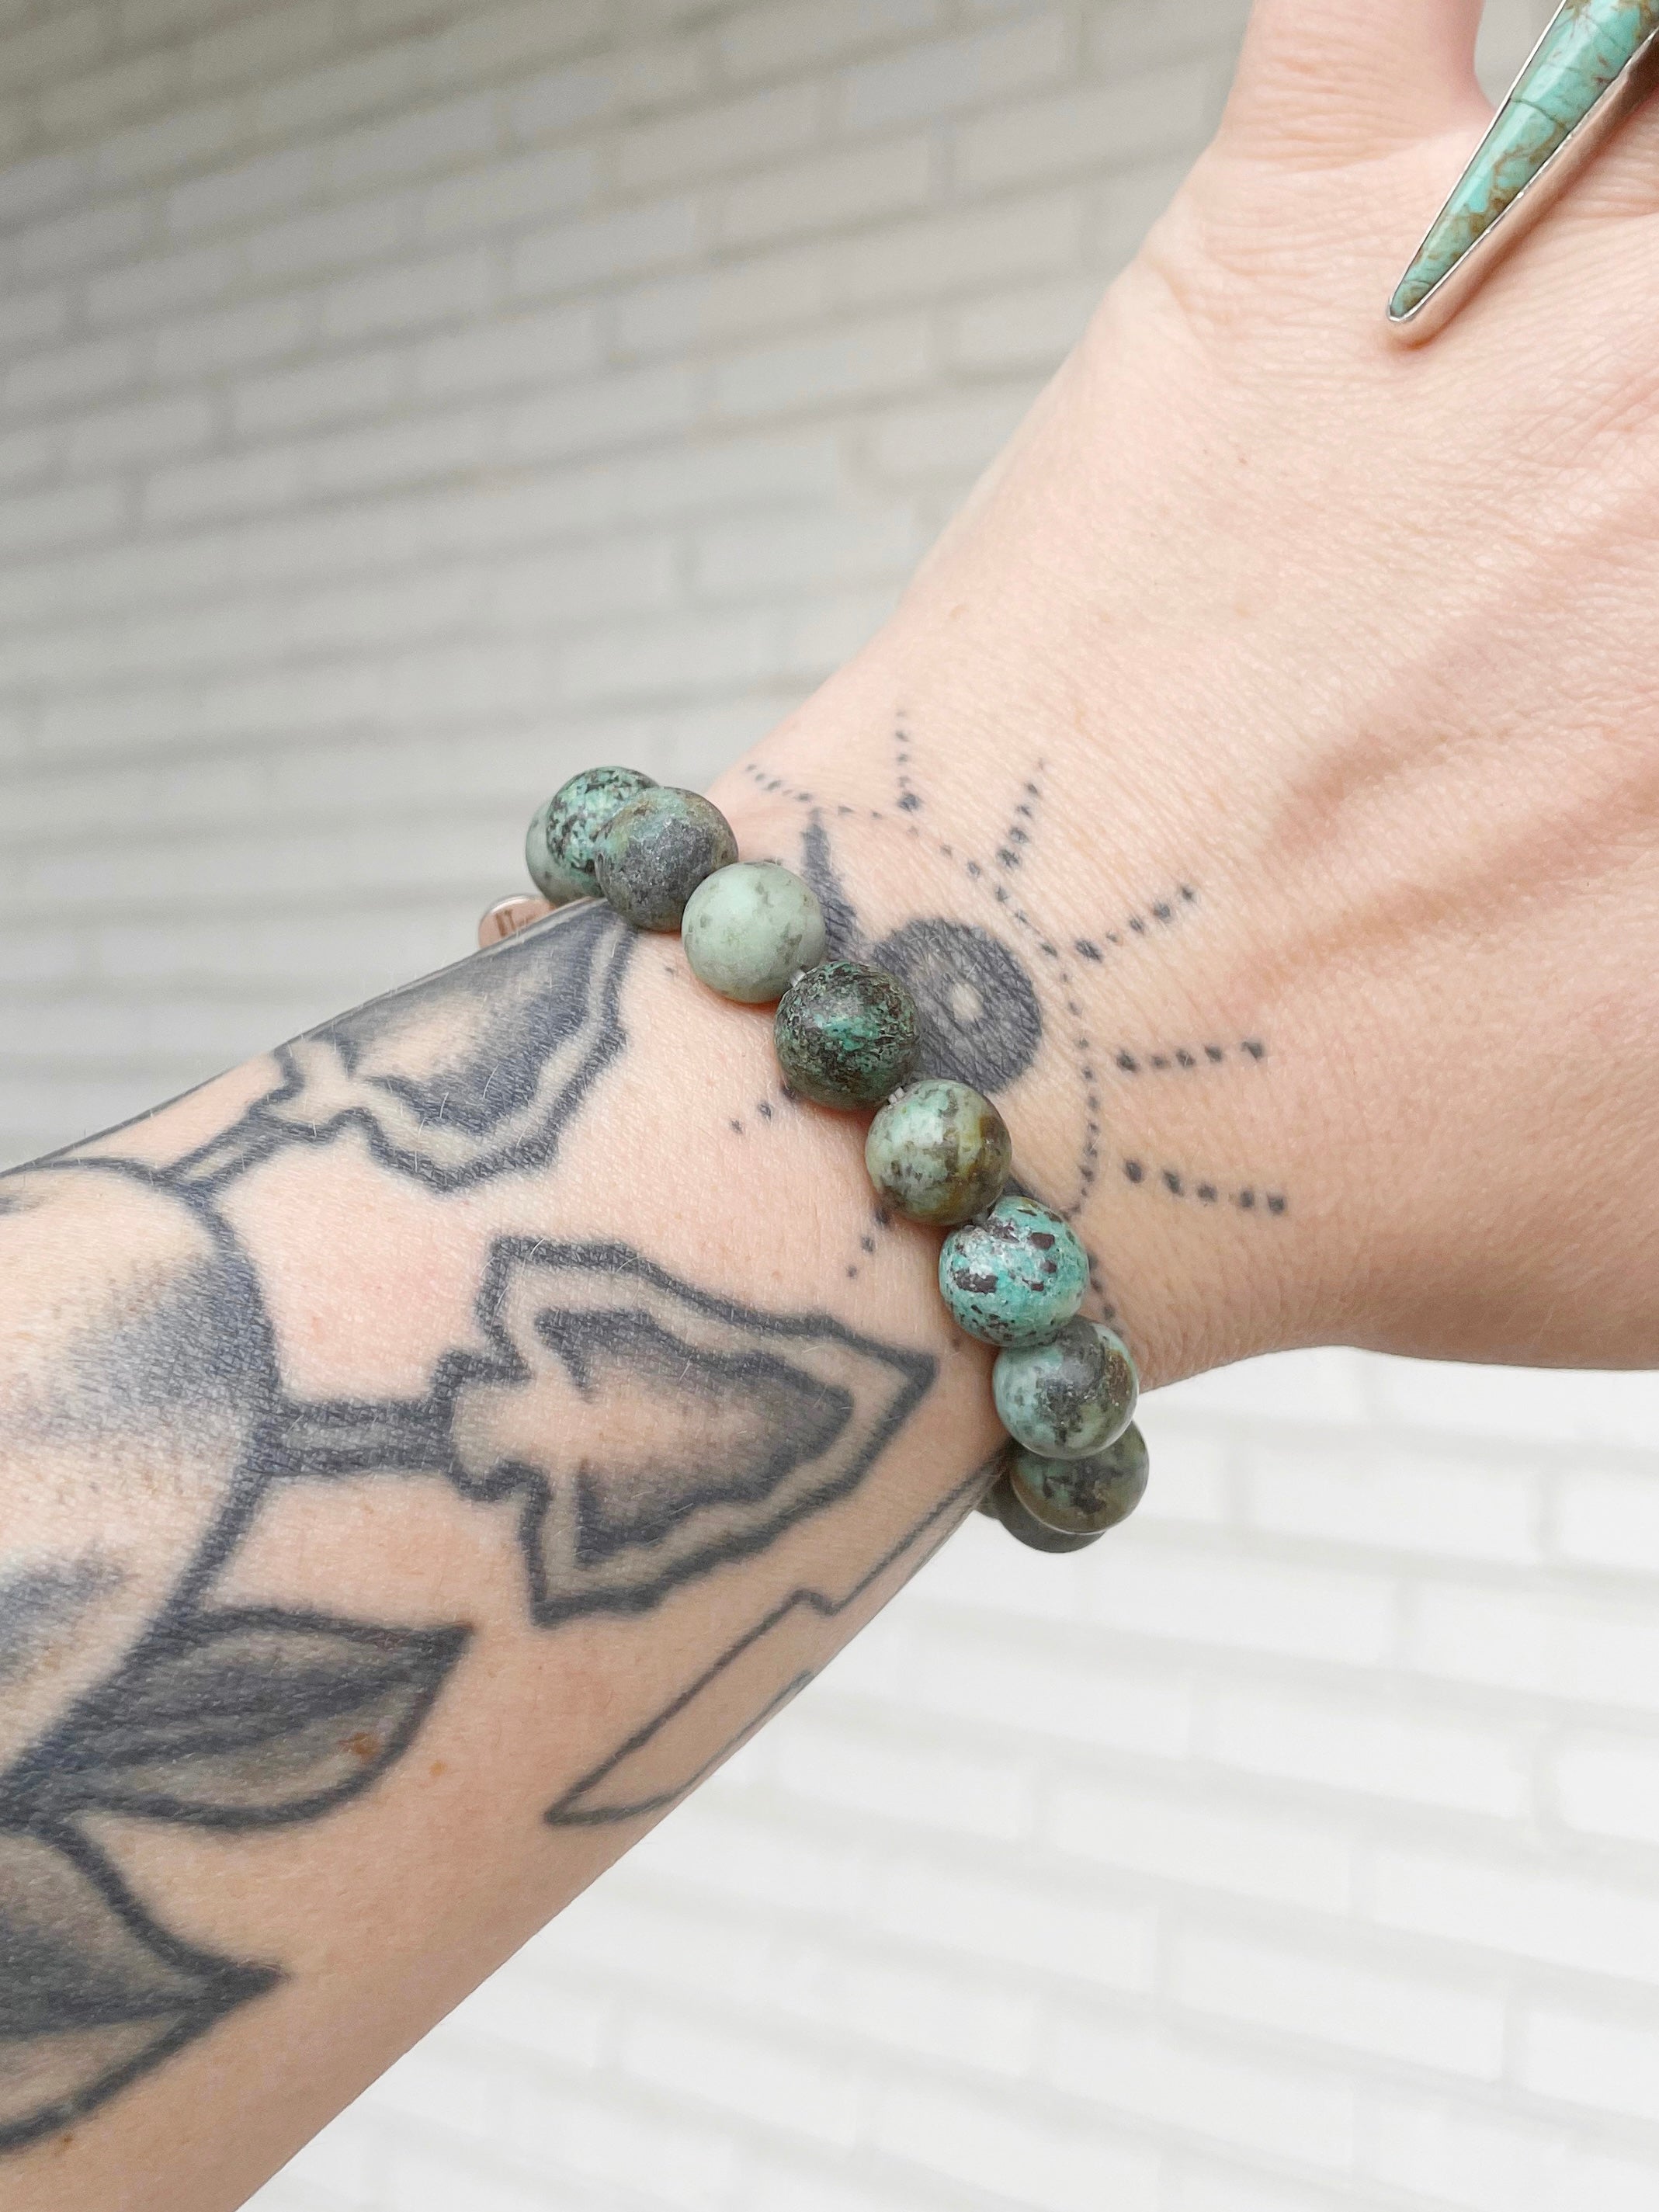 Buy AARU Adjustable African Turquoise Stone Bracelet - Handcrafted  Semi-Precious Gemstone Jewelry for Balance and Tranquility at Amazon.in